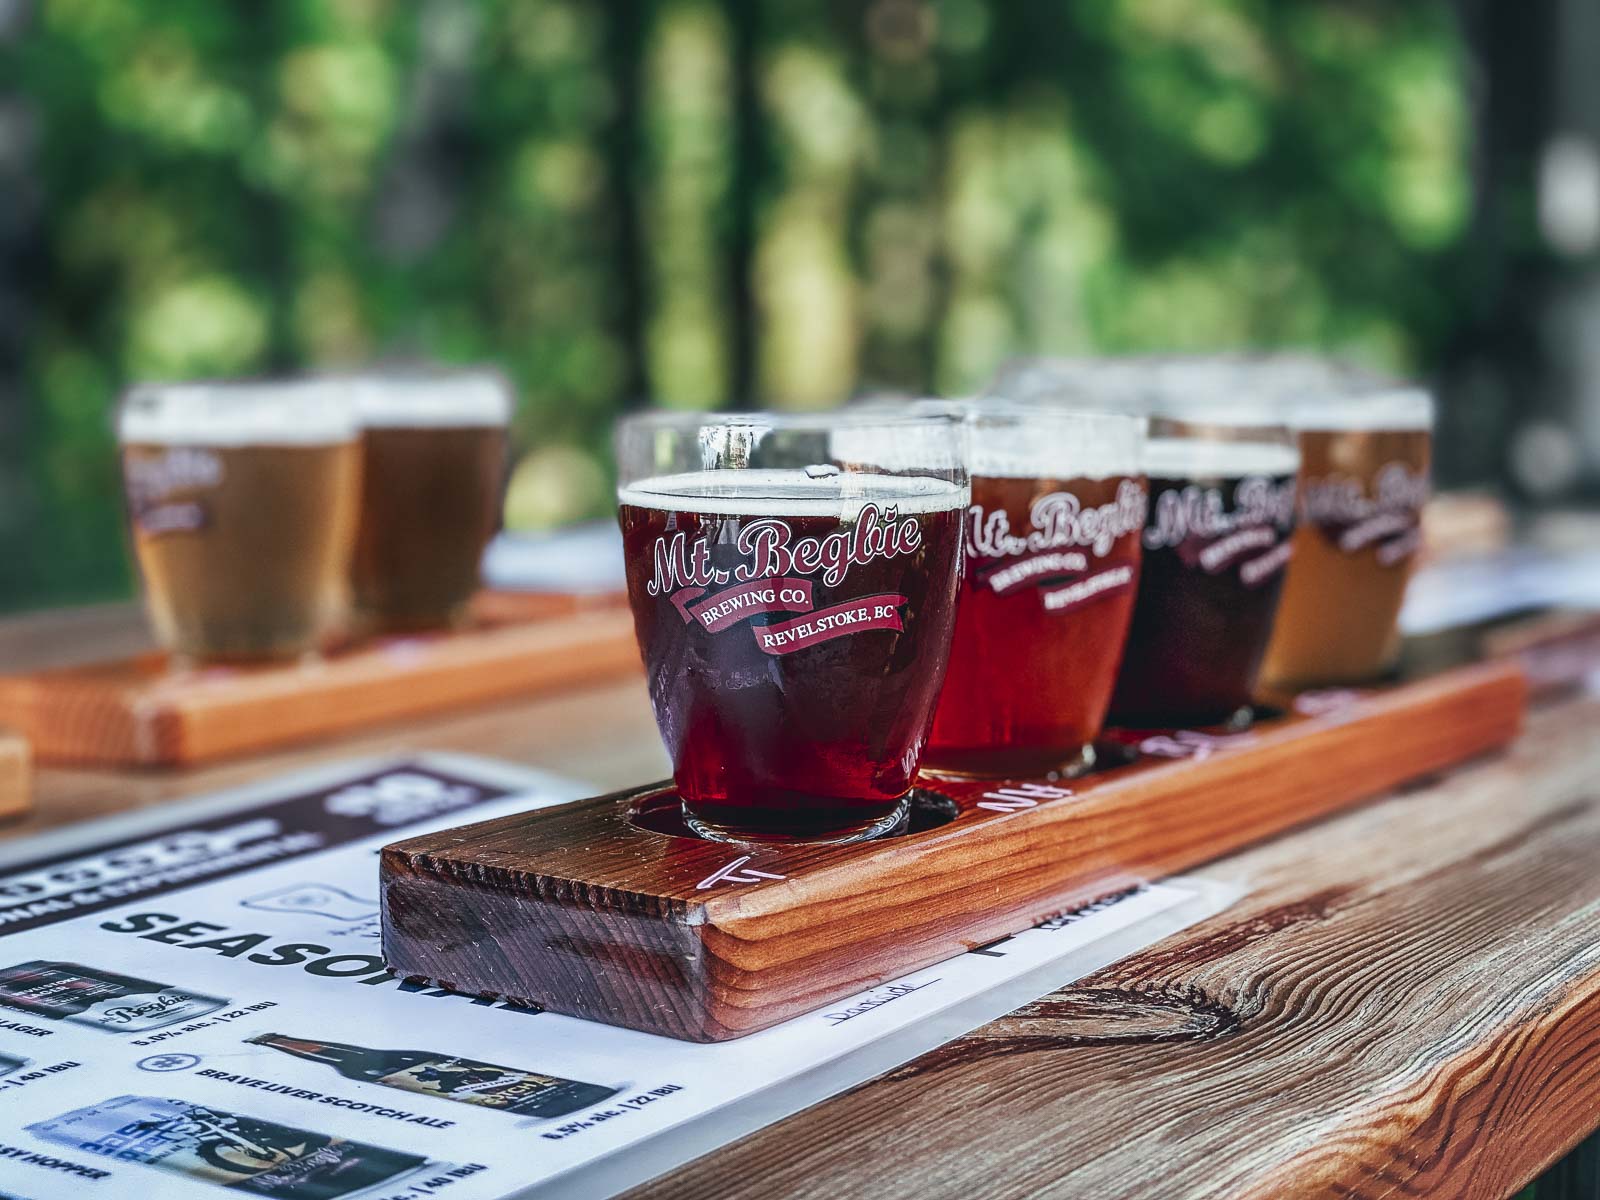 things to do in revelstoke begbie brewery tour